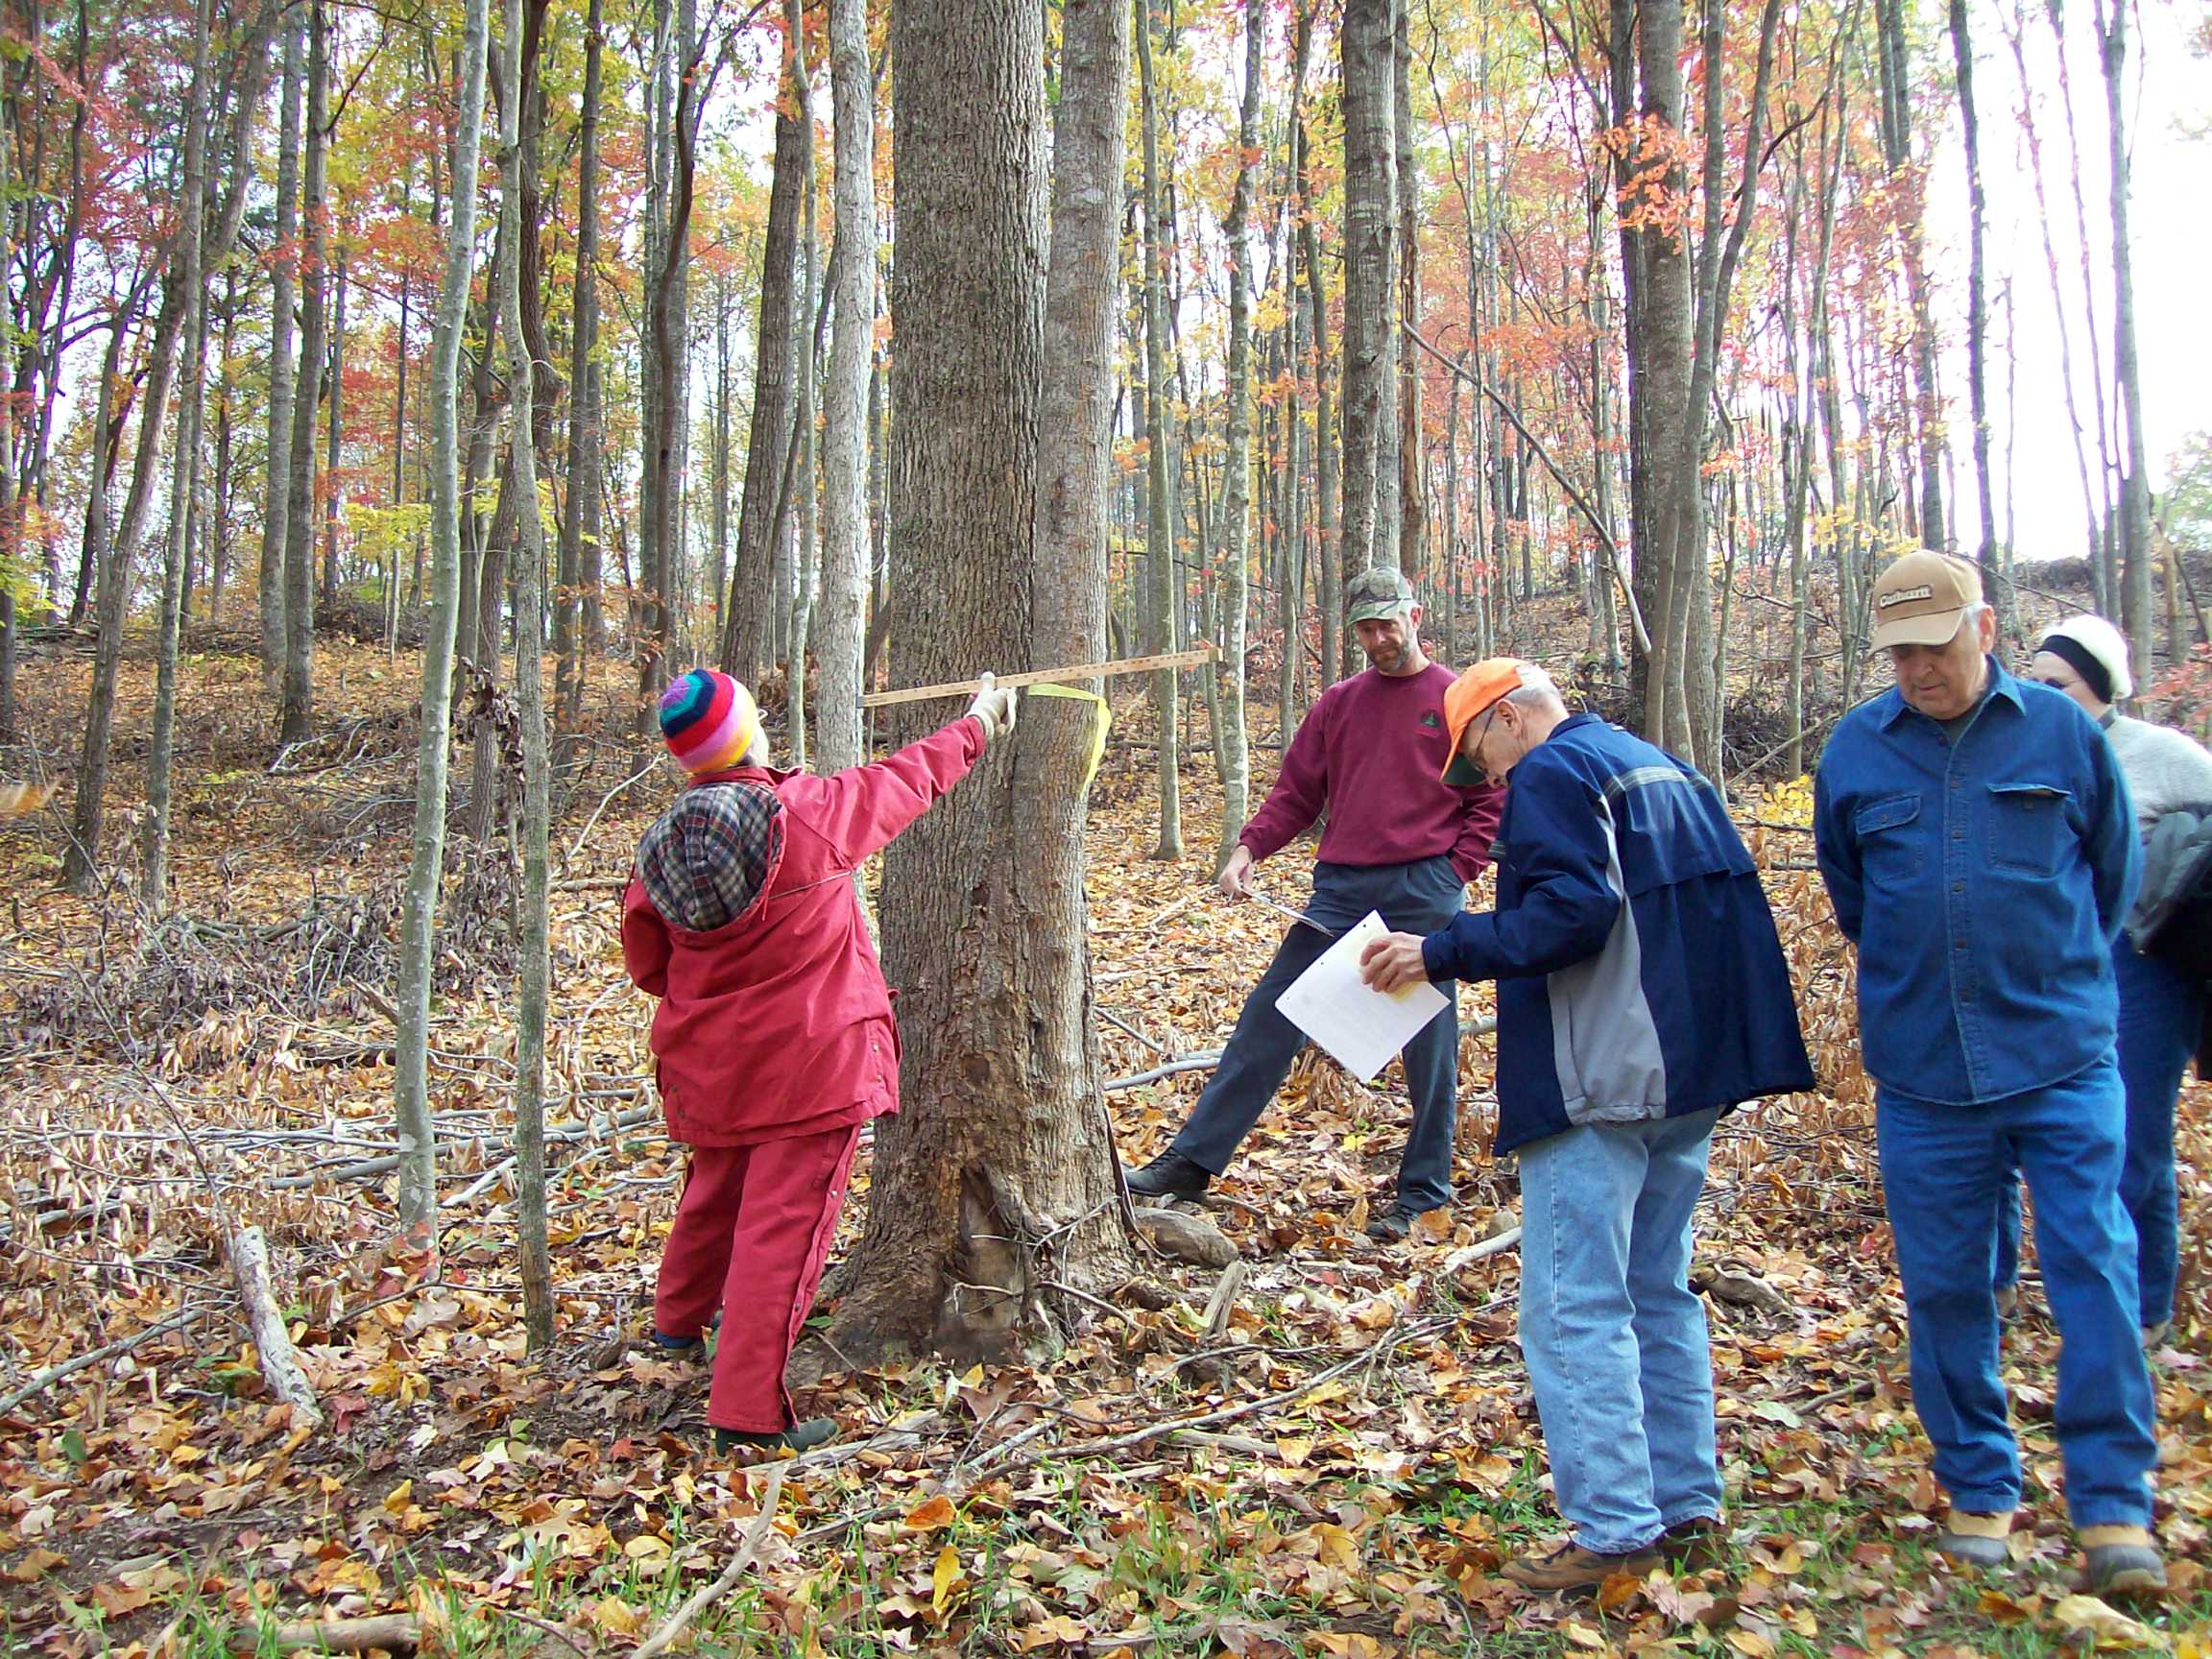 Participants in a Sustainable Timber Harvesting and Marketing short course held in Bedford learn to measure timber using a Biltmore stick.